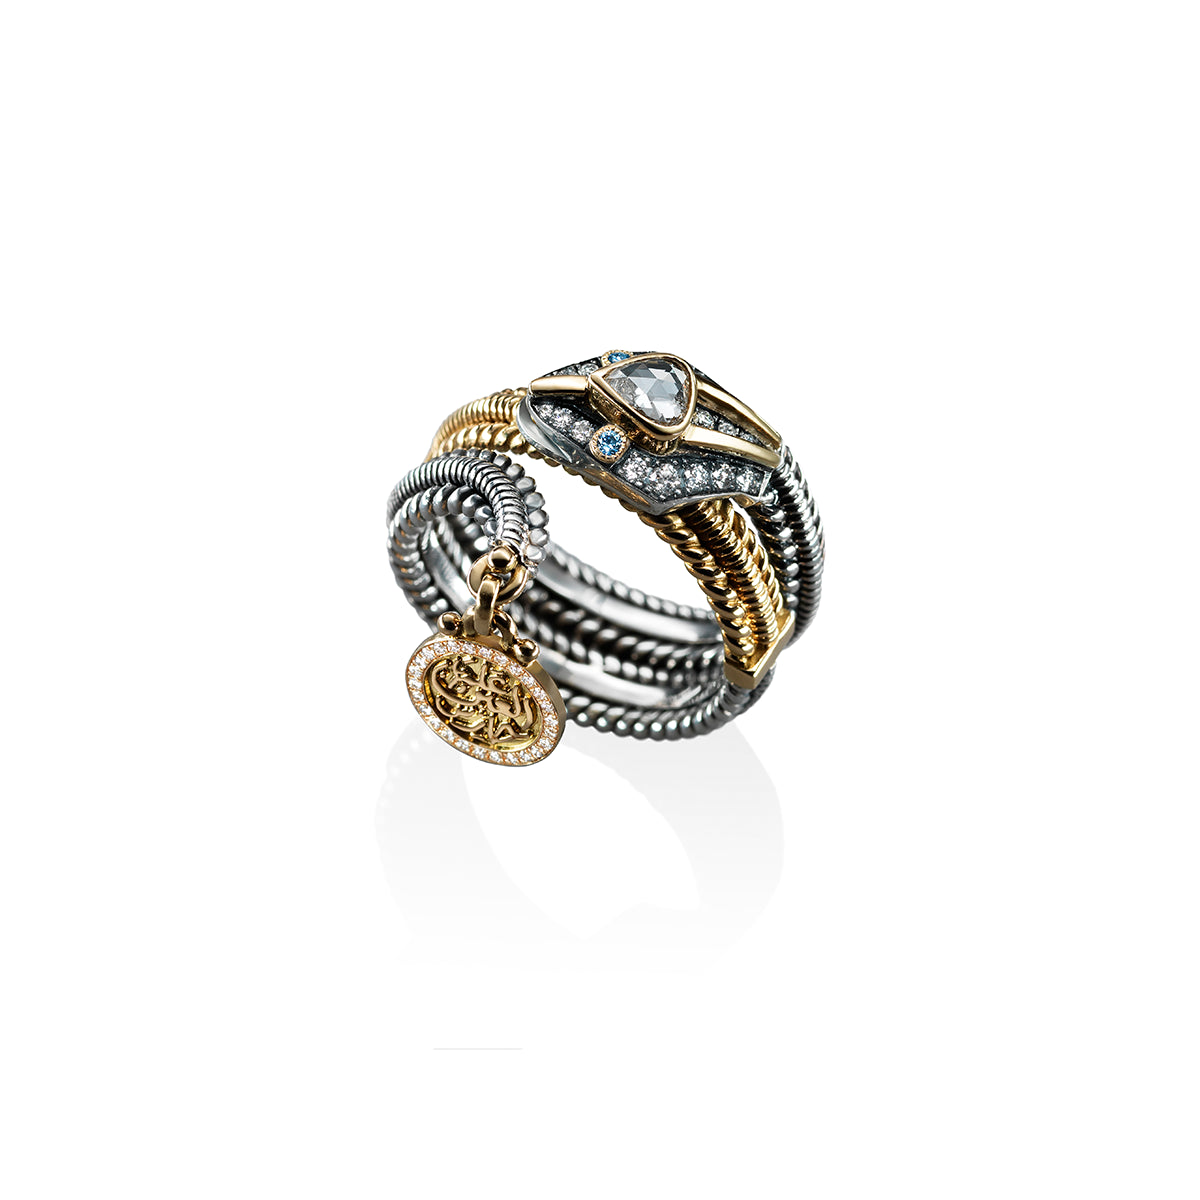 The Exclusive Snake Ring by Azza Fahmy - Designer Rings